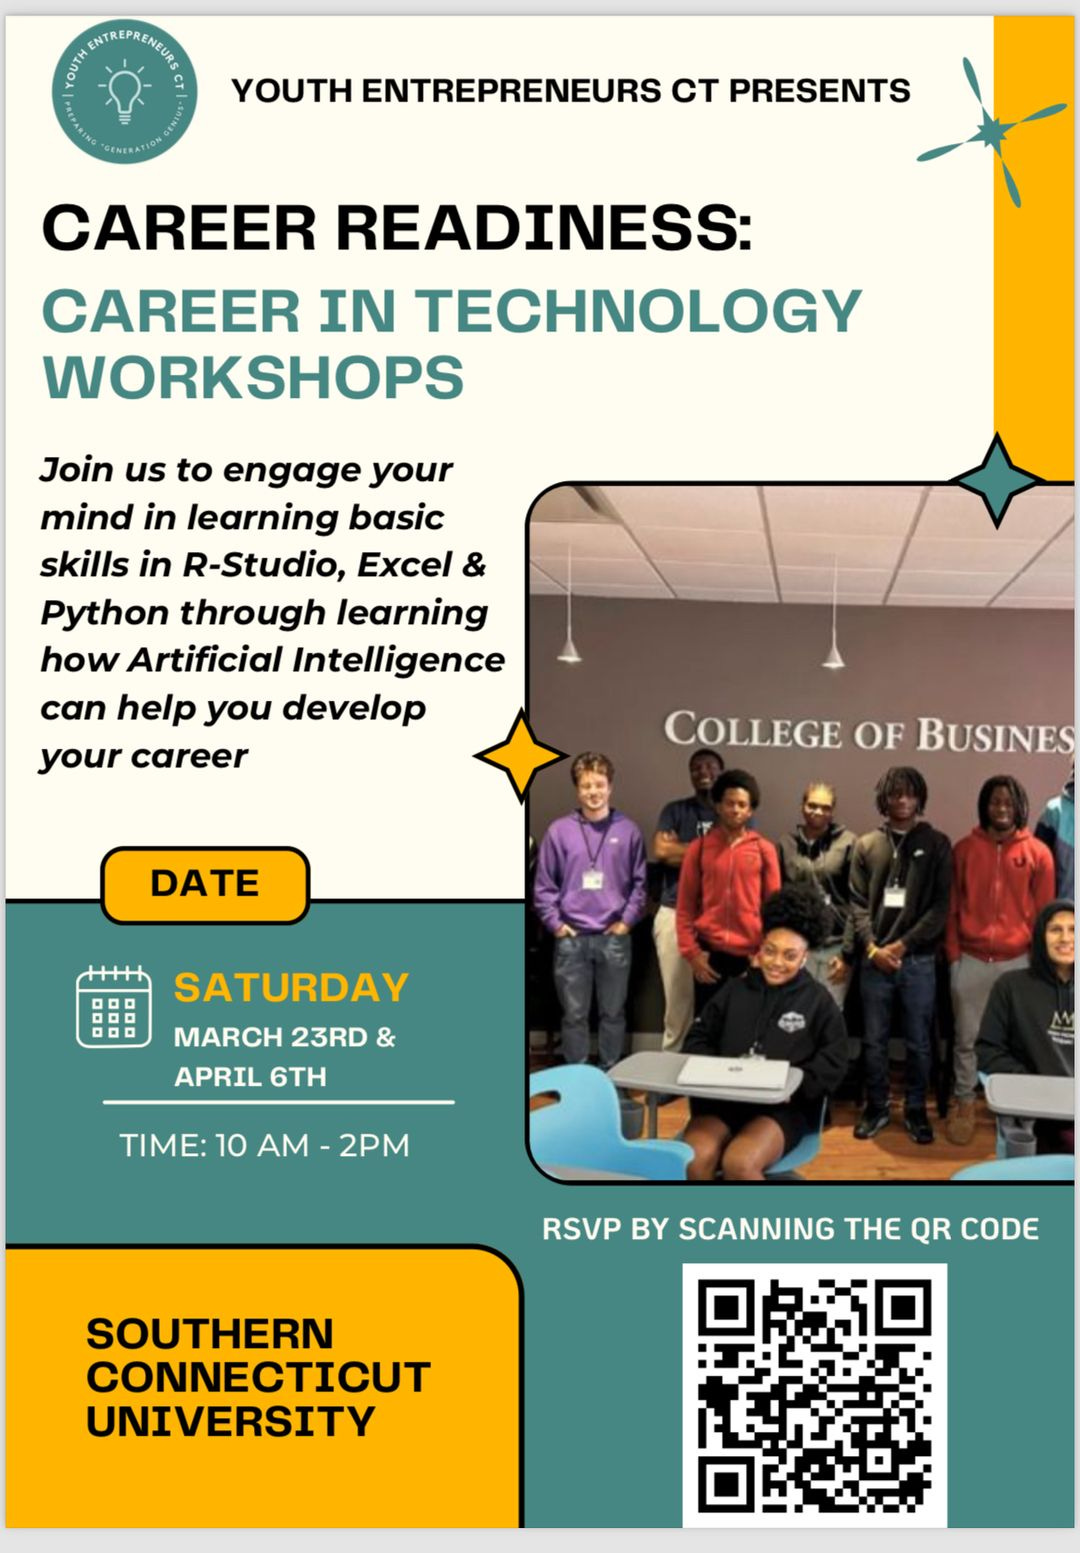 May be a graphic of 6 people and text that says 'CIWNENTERENEAITO ENTREPRENEURS Gt YOUTH ENTREPRENEURS CT PRESENTS CAREER READINESS: CAREER IN TECHNOLOGY WORKSHOPS Join us to engage your mind in learning basic skills in R-Studio, Excel & Python through learning how Artificial Intelligence can help you develop your career COLLEGE OF BUSINES DATE SATURDAY MARCH 23RD MARCH23RD & APRIL 6TH TIME: 10 AM 2PM RSVP BY SCANNING THE QR CODE SOUTHERN CONNECTICUT UNIVERSITY'